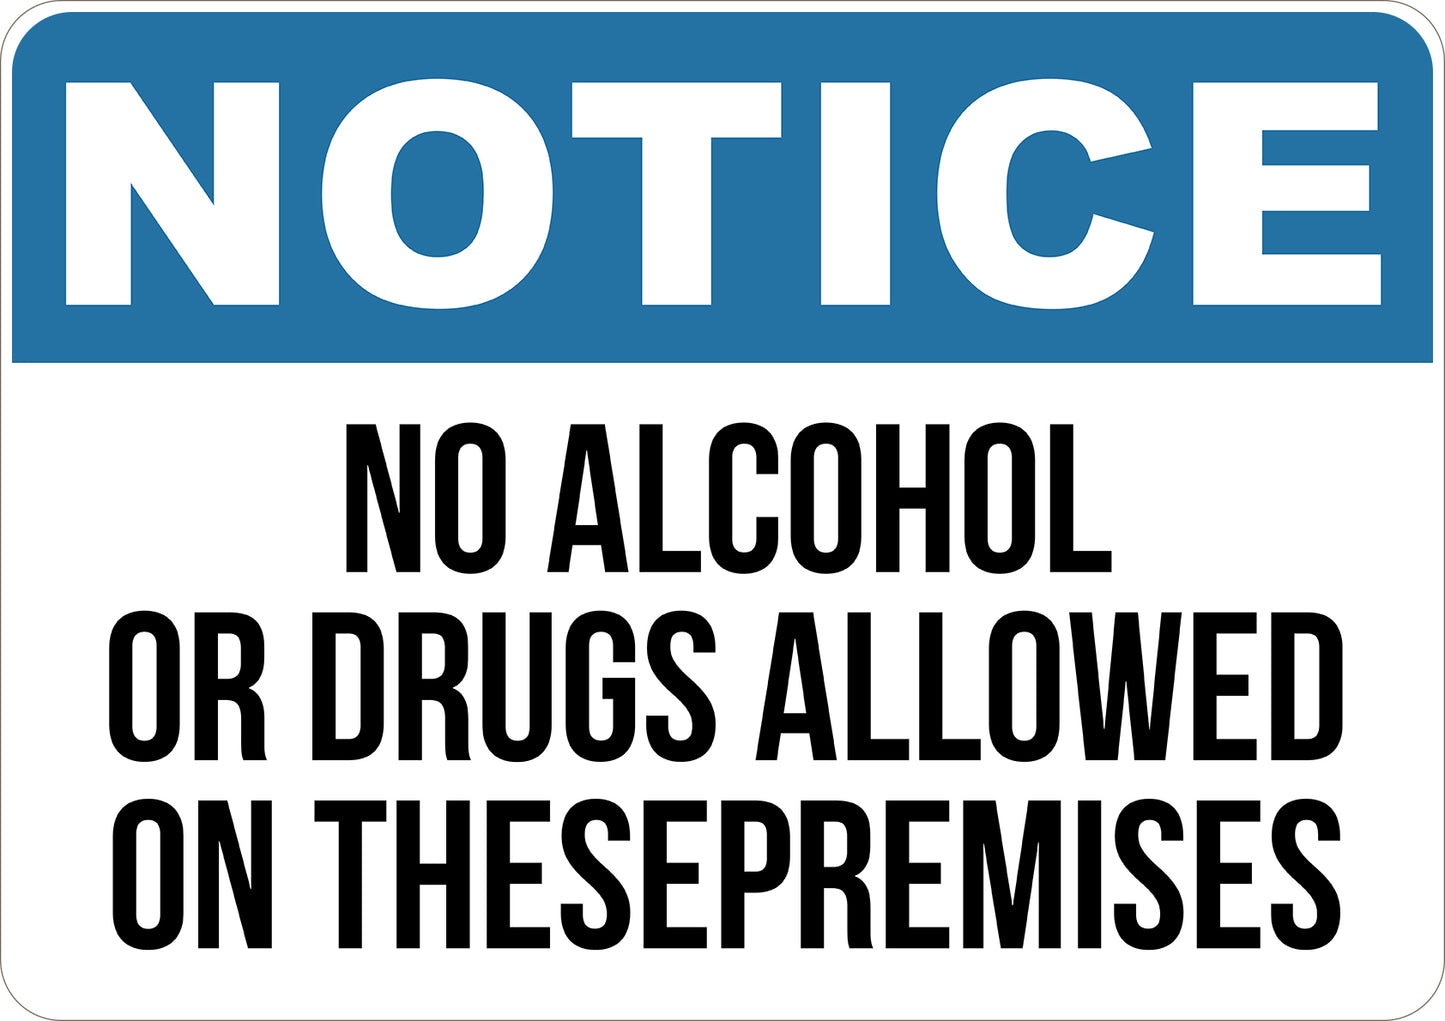 No Alcohol or Drugs Allowed On